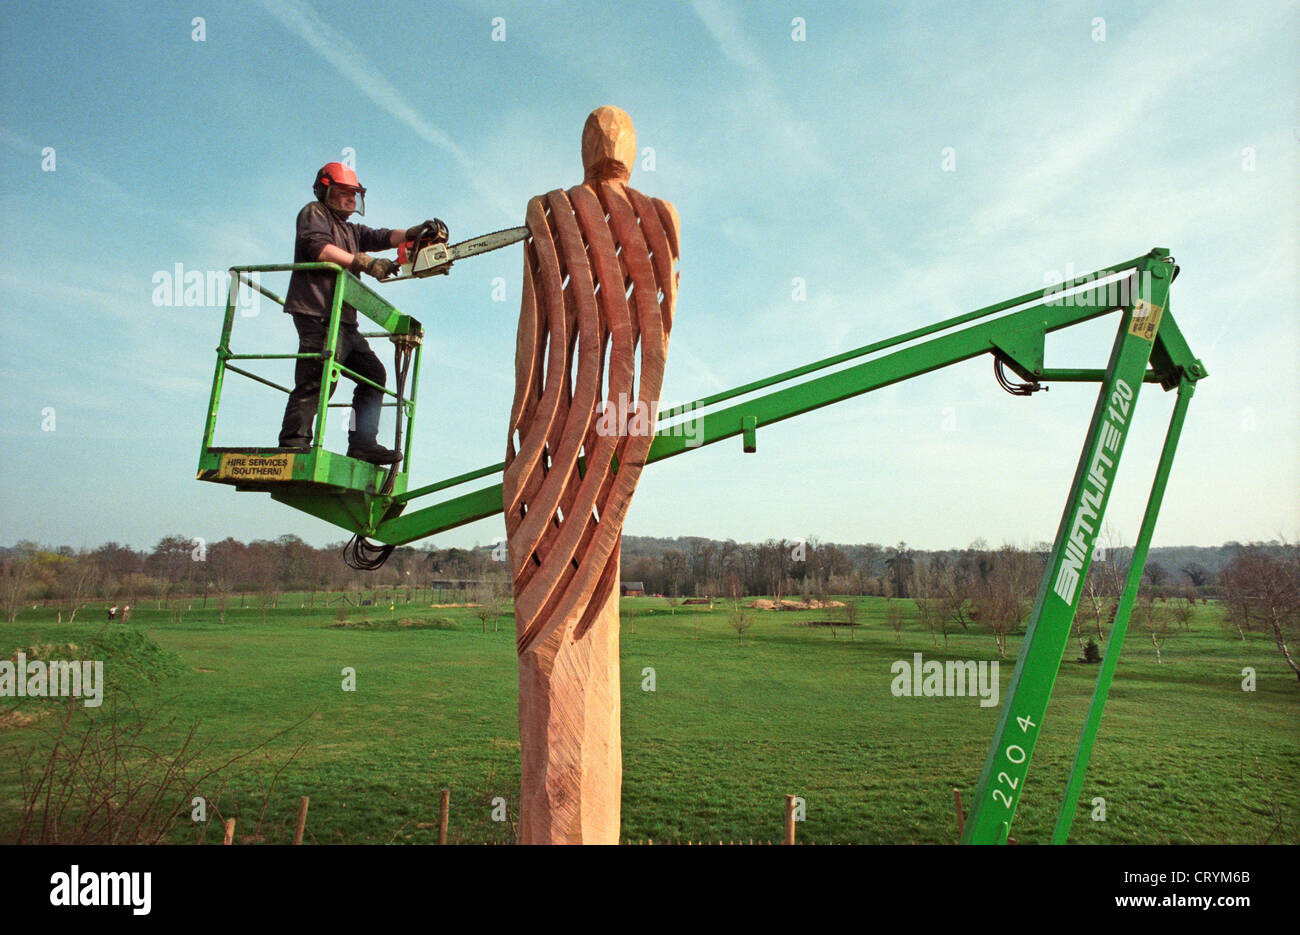 A chainsaw sculptor on the platform of a cherrypicker carving a lattice figure from a dead oak tree in Broadwater Park, Godalming, Surrey, England, UK. Stock Photo